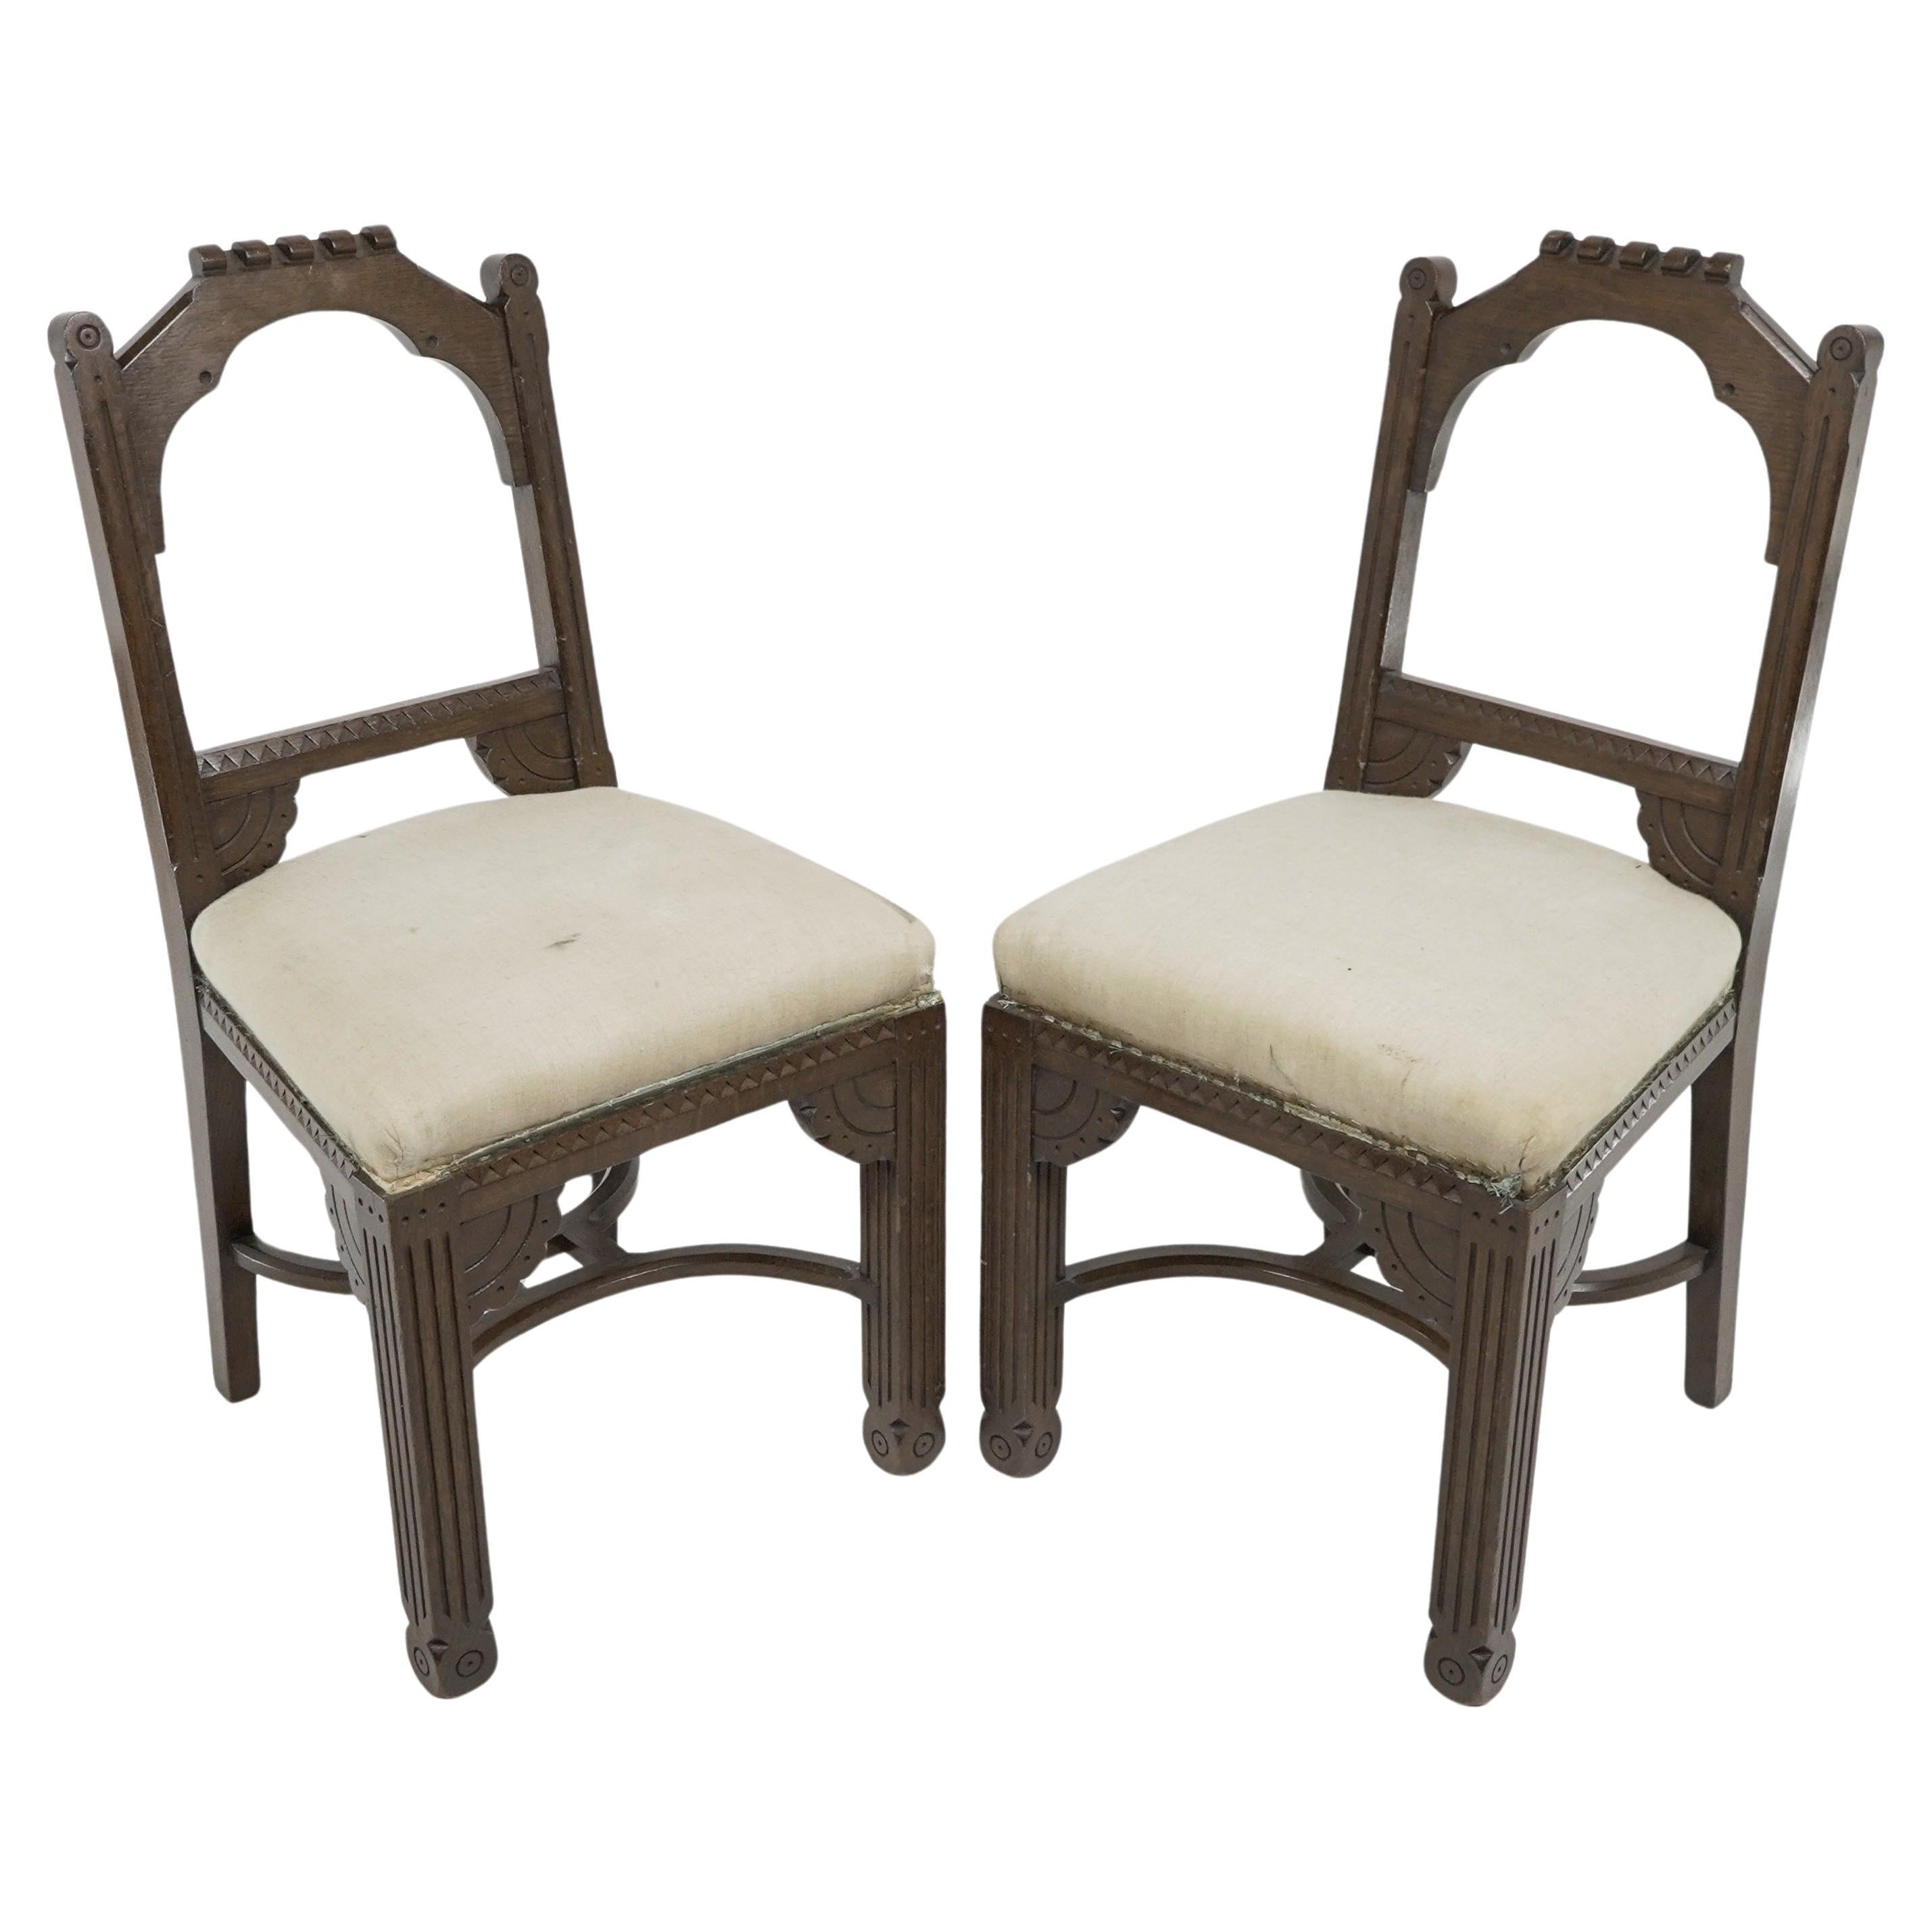 R Boyd. in the style of Dr C Dresser. A pair of oak side chairs For Sale